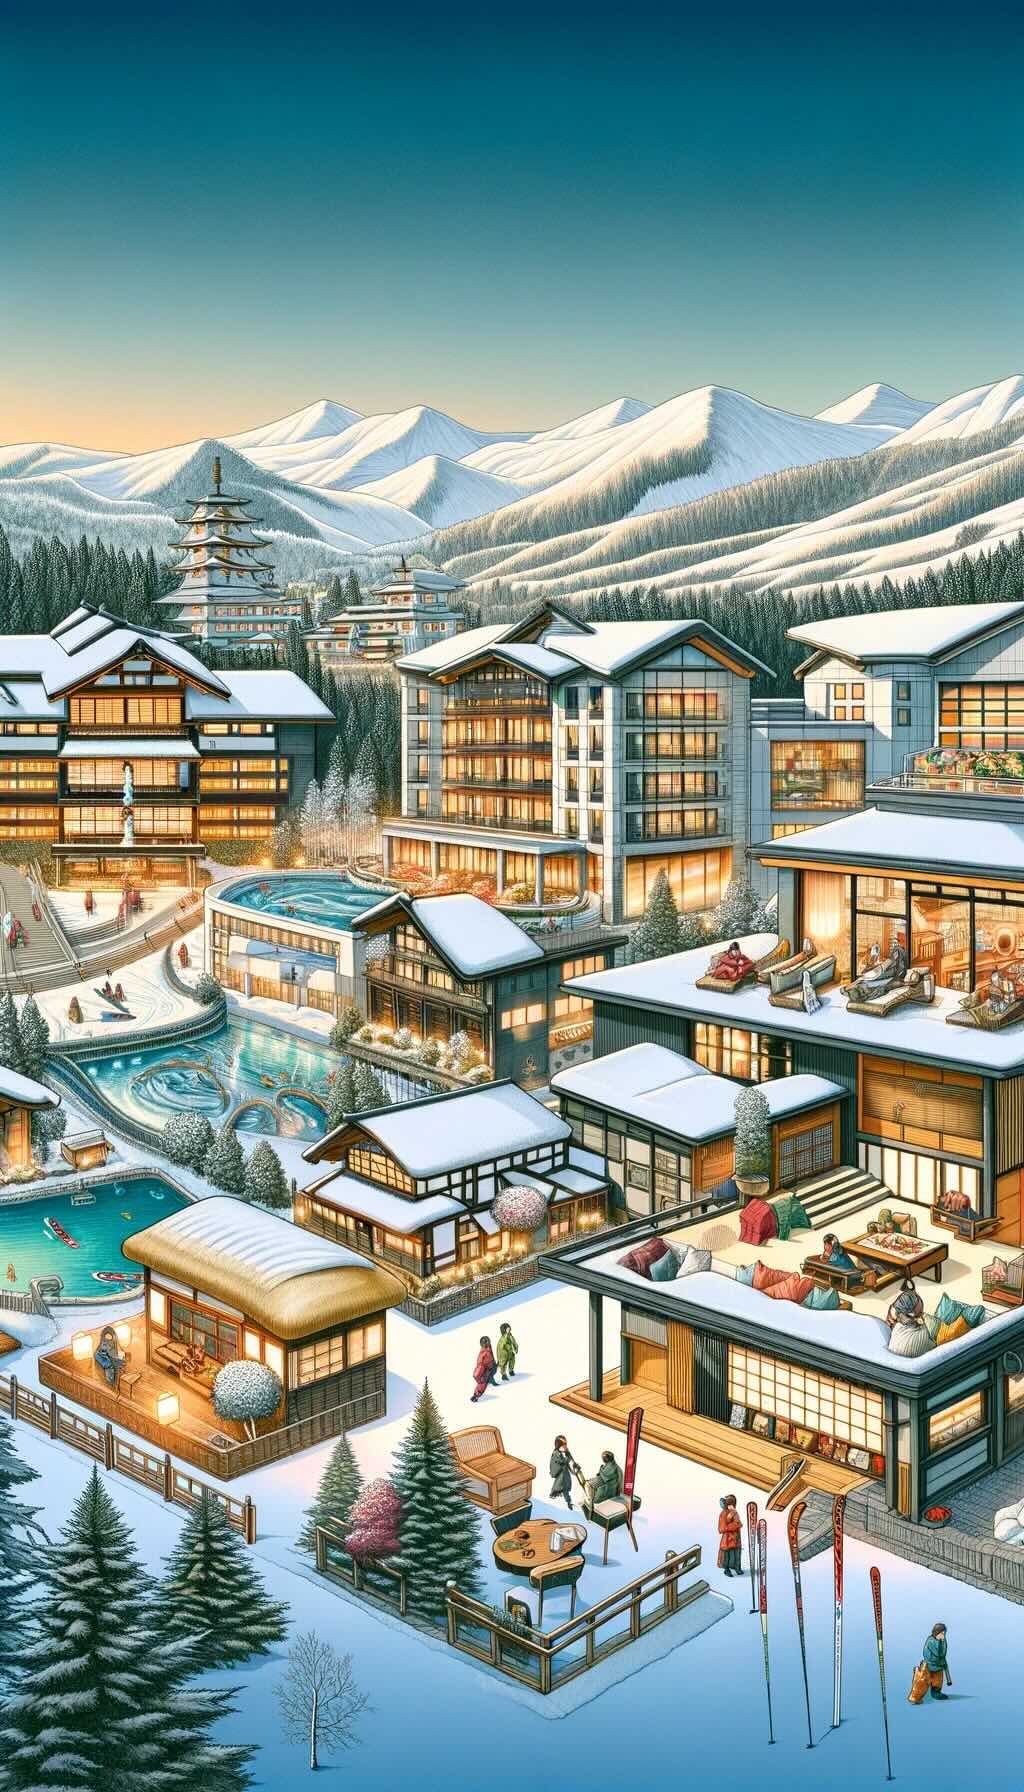 Variety of accommodation options available in Nagano, from luxurious ski resorts to traditional ryokans and cozy boutique lodges.